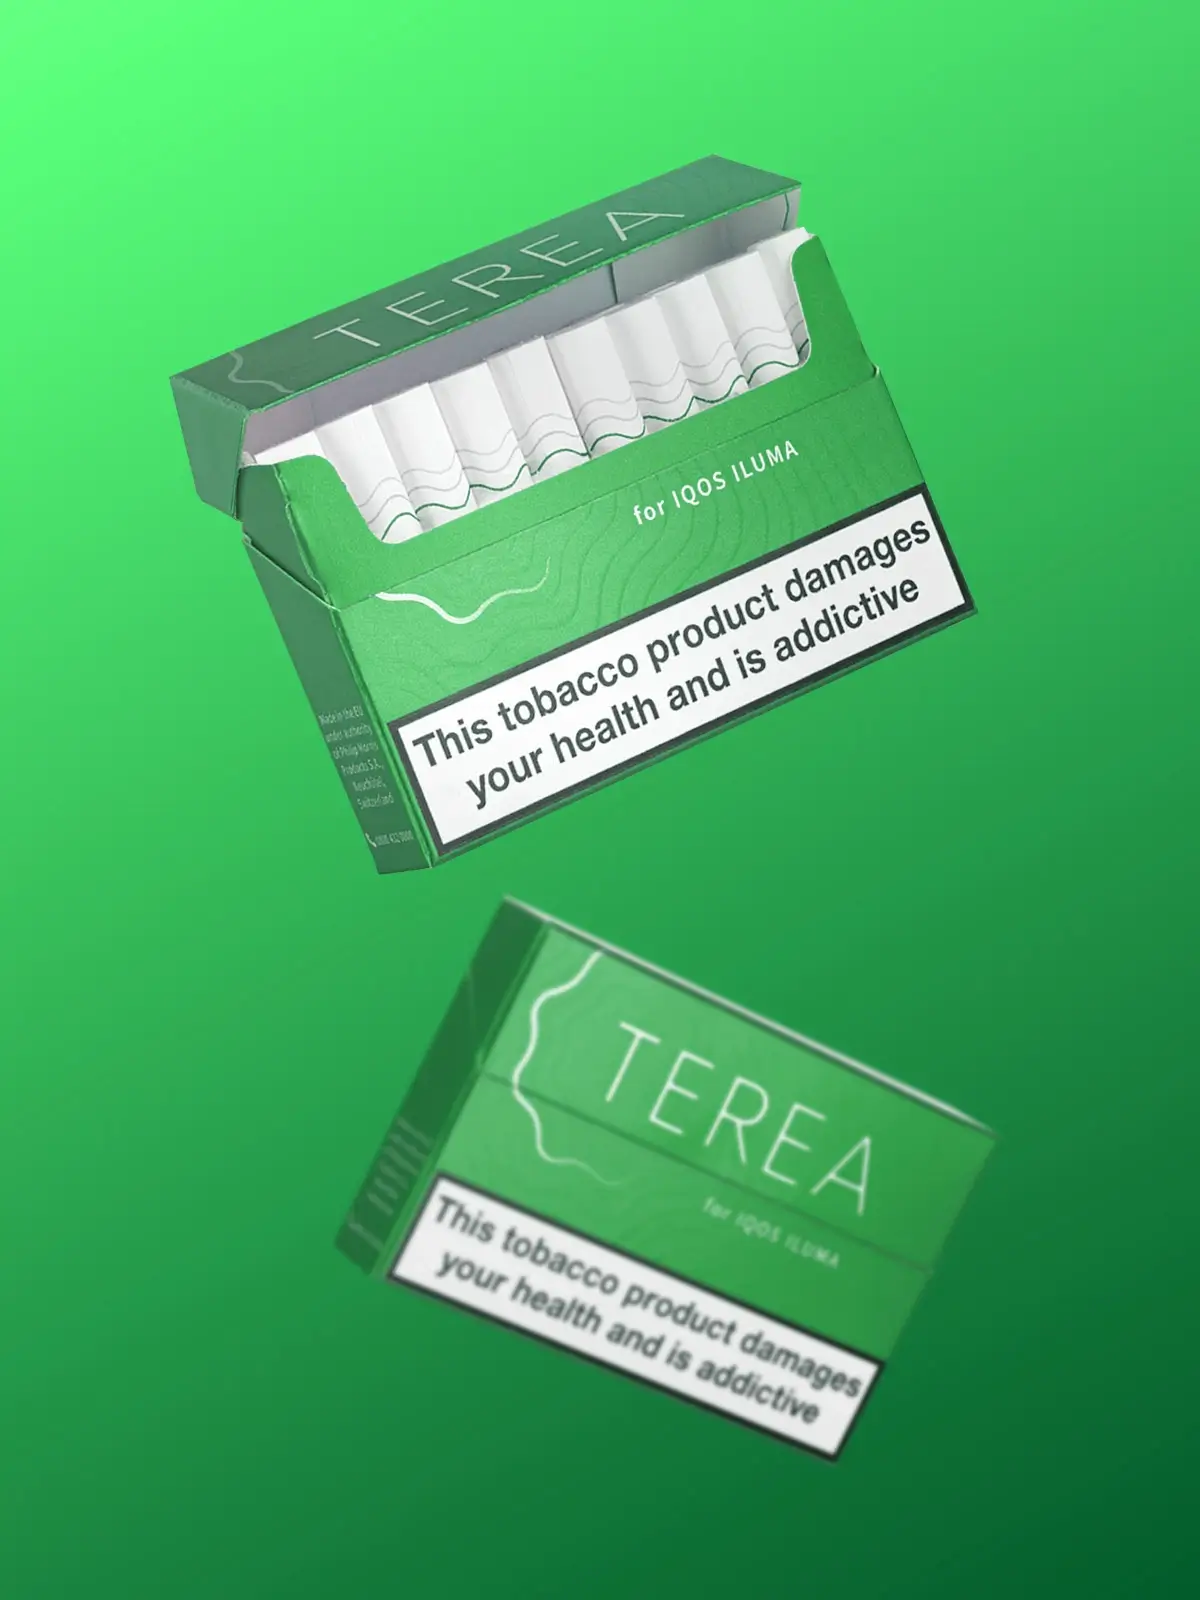 Two packs of IQOS TEREA Green floating in front of a green background